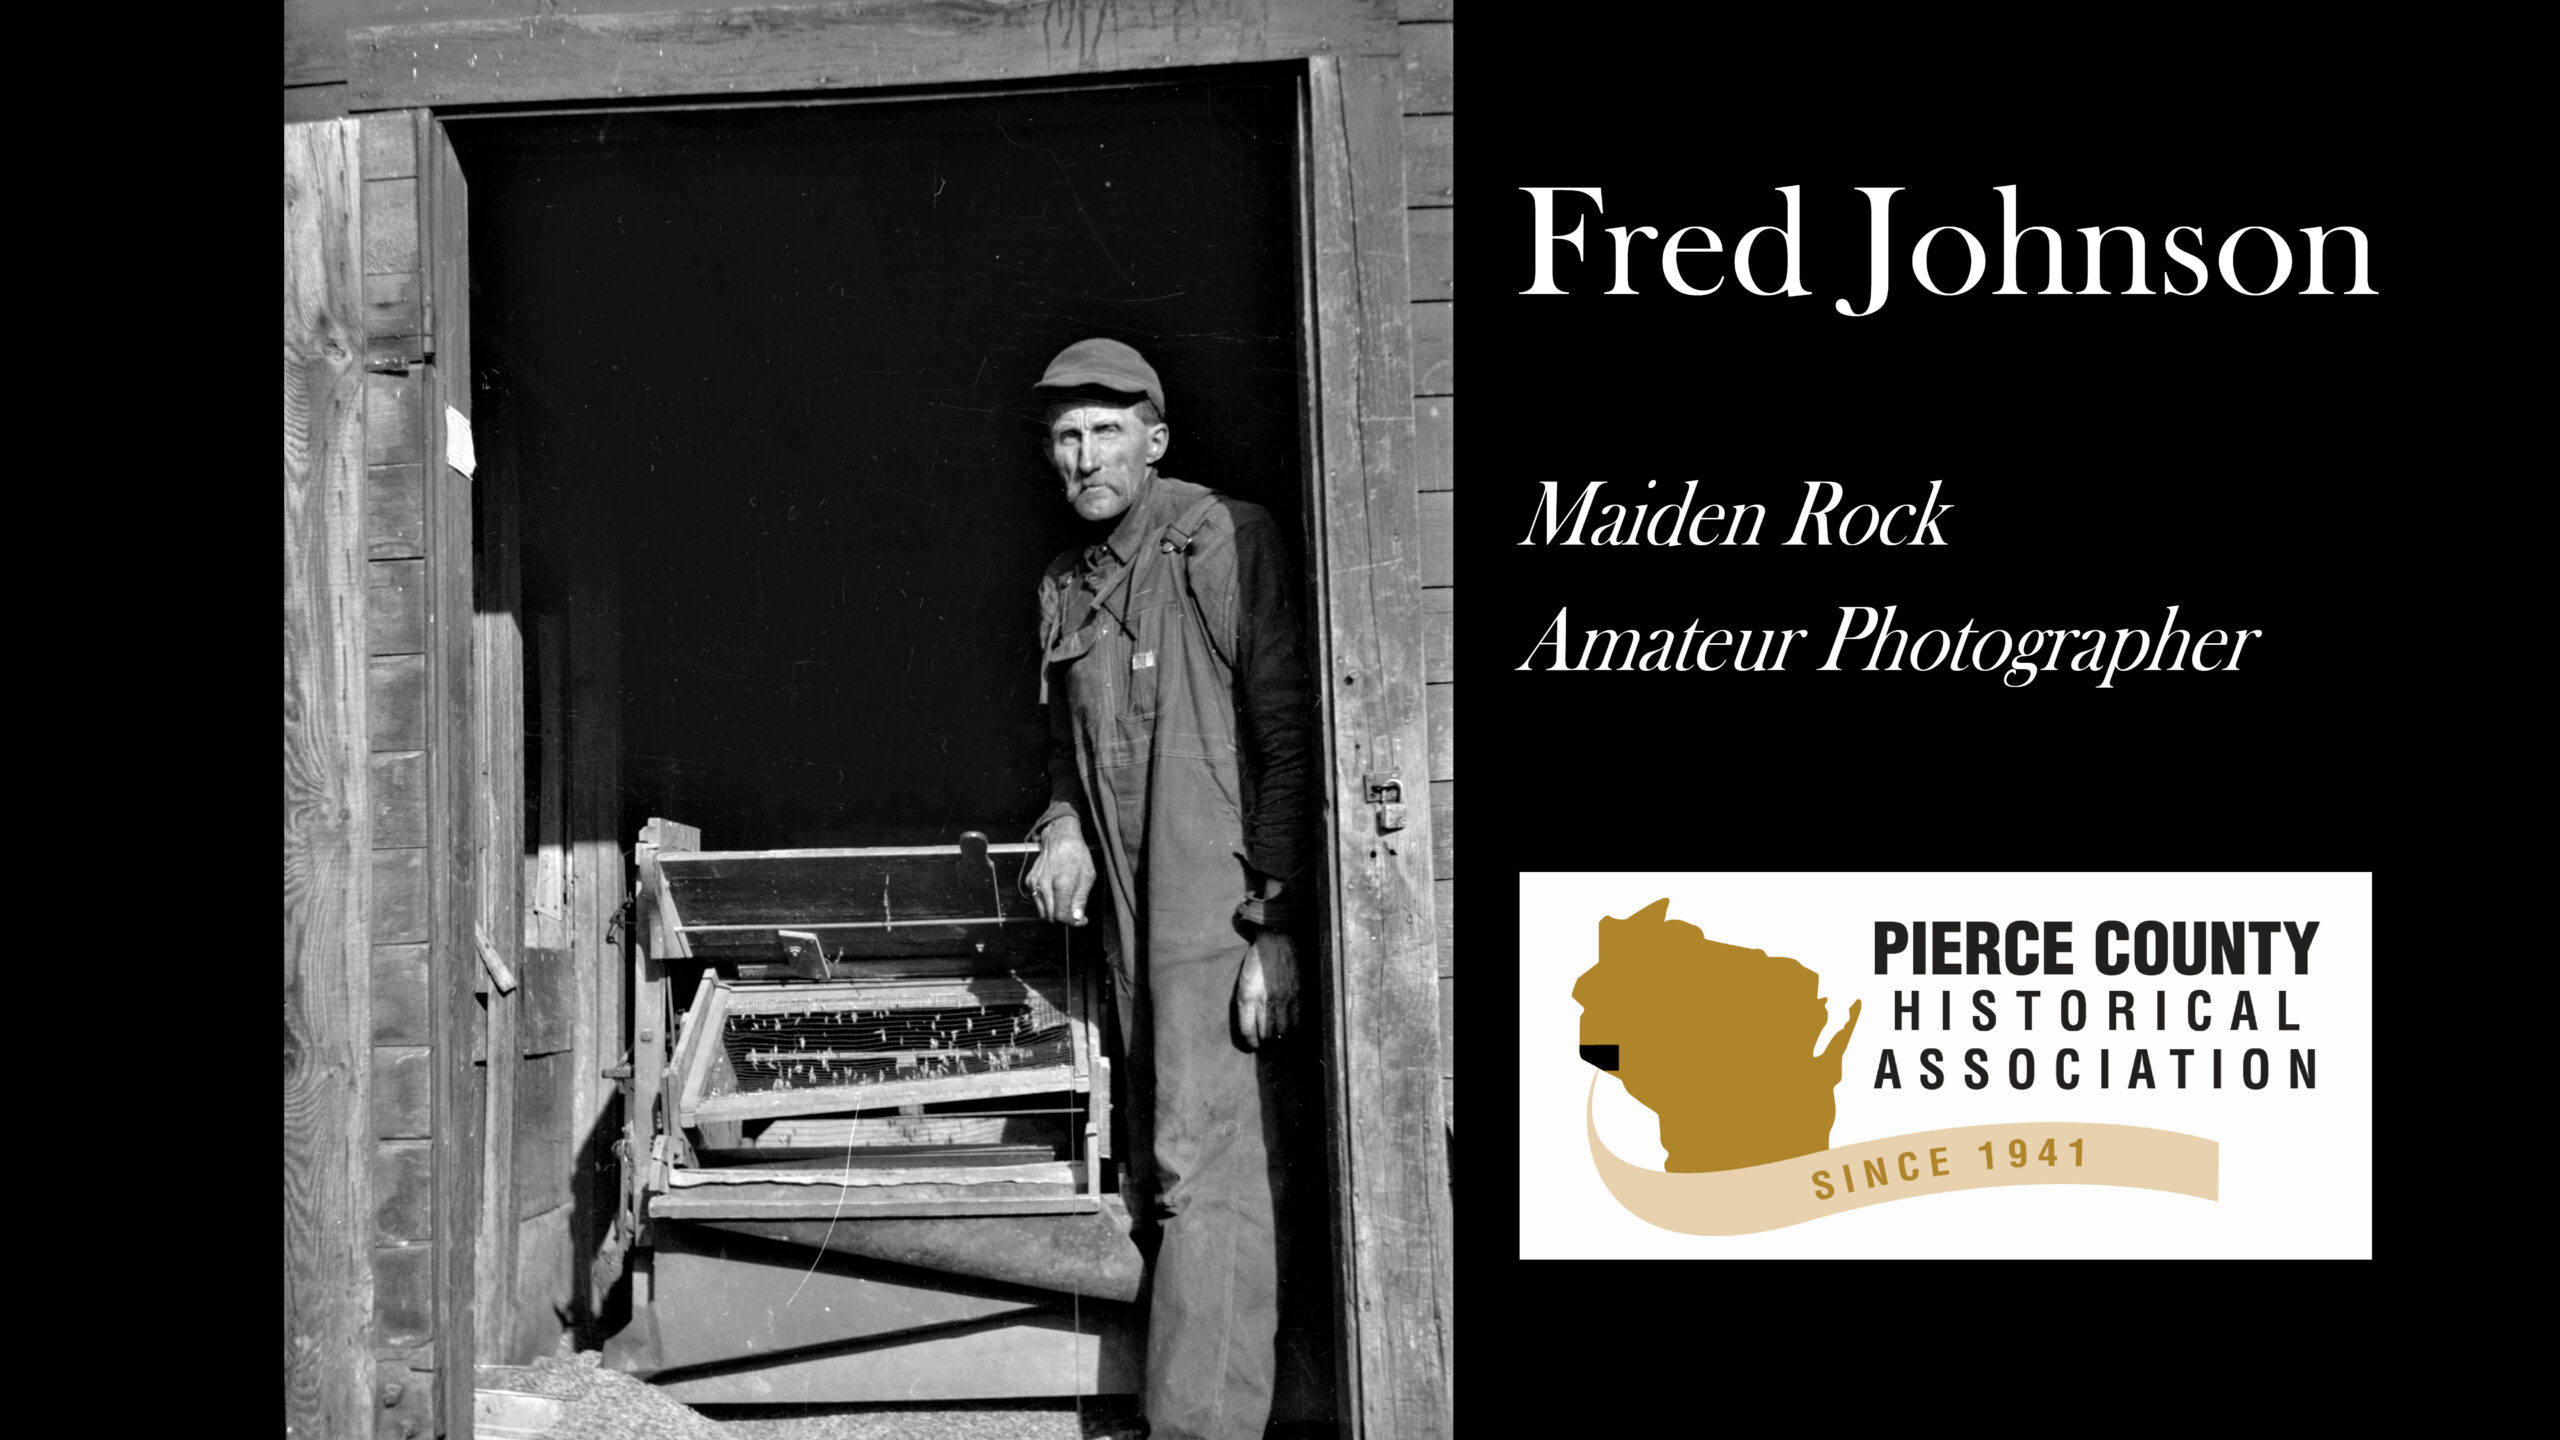 Fred Johnson, Early Selfie Photographer – Maiden Rock, Wisconsin